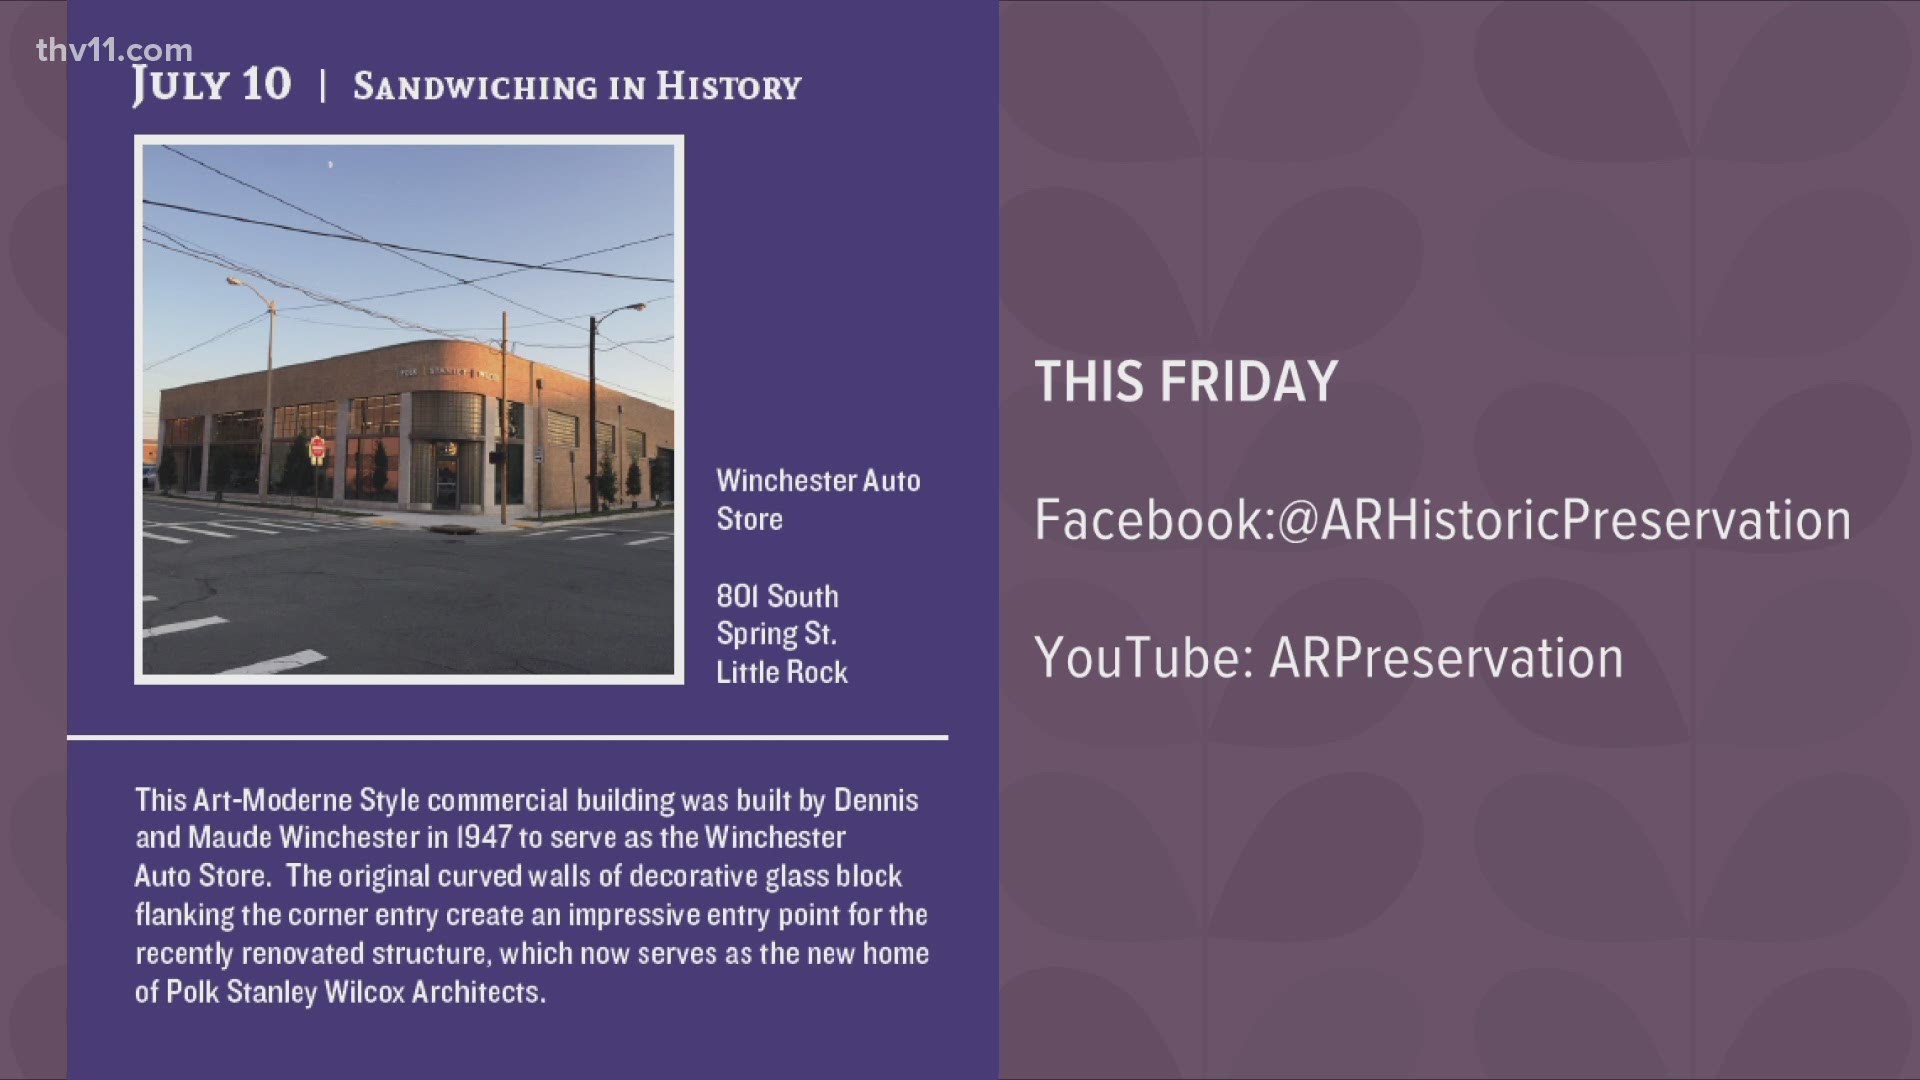 You'll want to check out the online "Sandwiching in History" tour as they highlight the Winchester Auto Store.